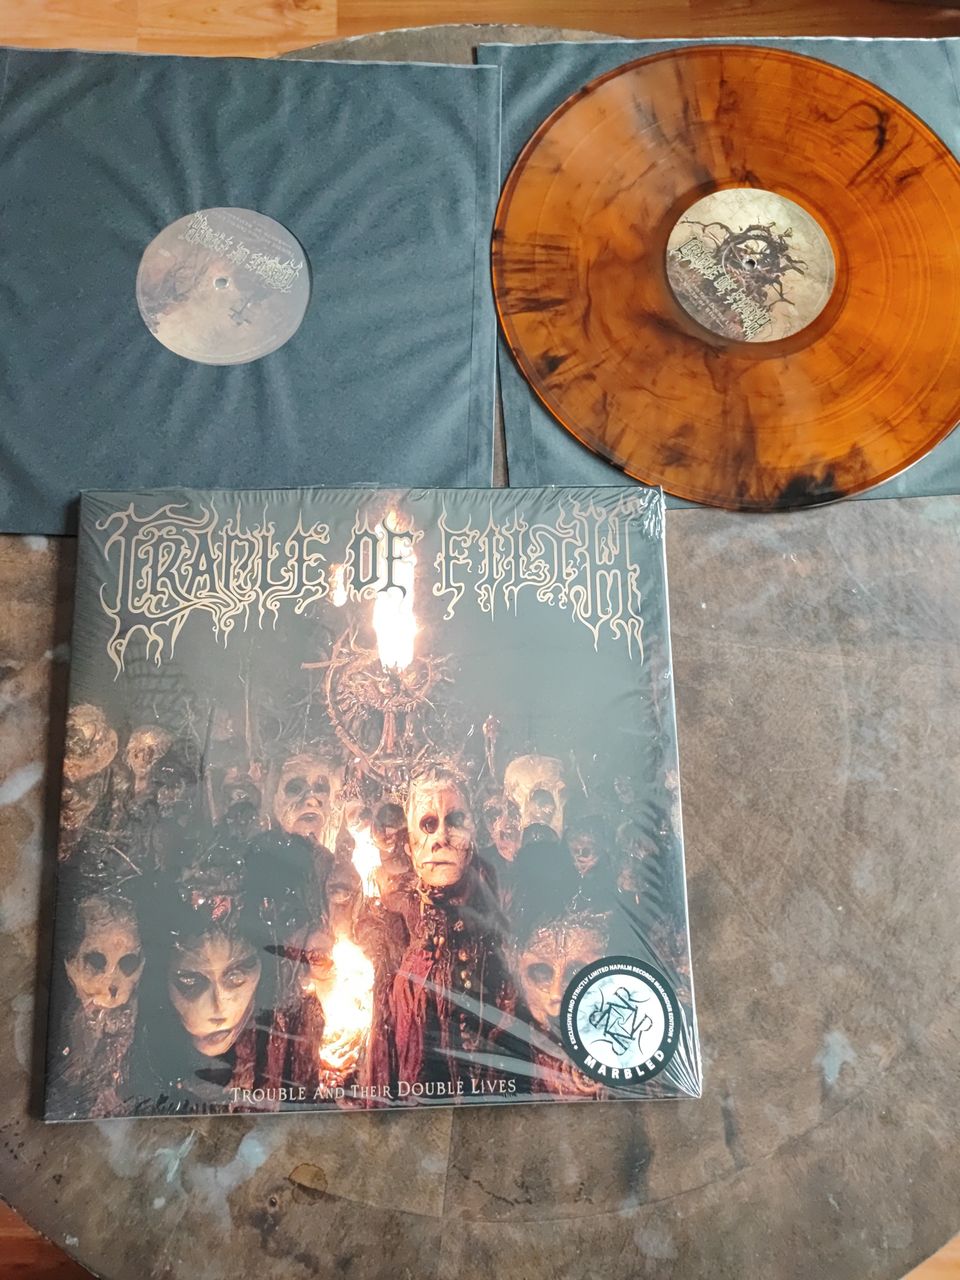 Cradle of Filth - Trouble Lives and Their Double Lives 2LP